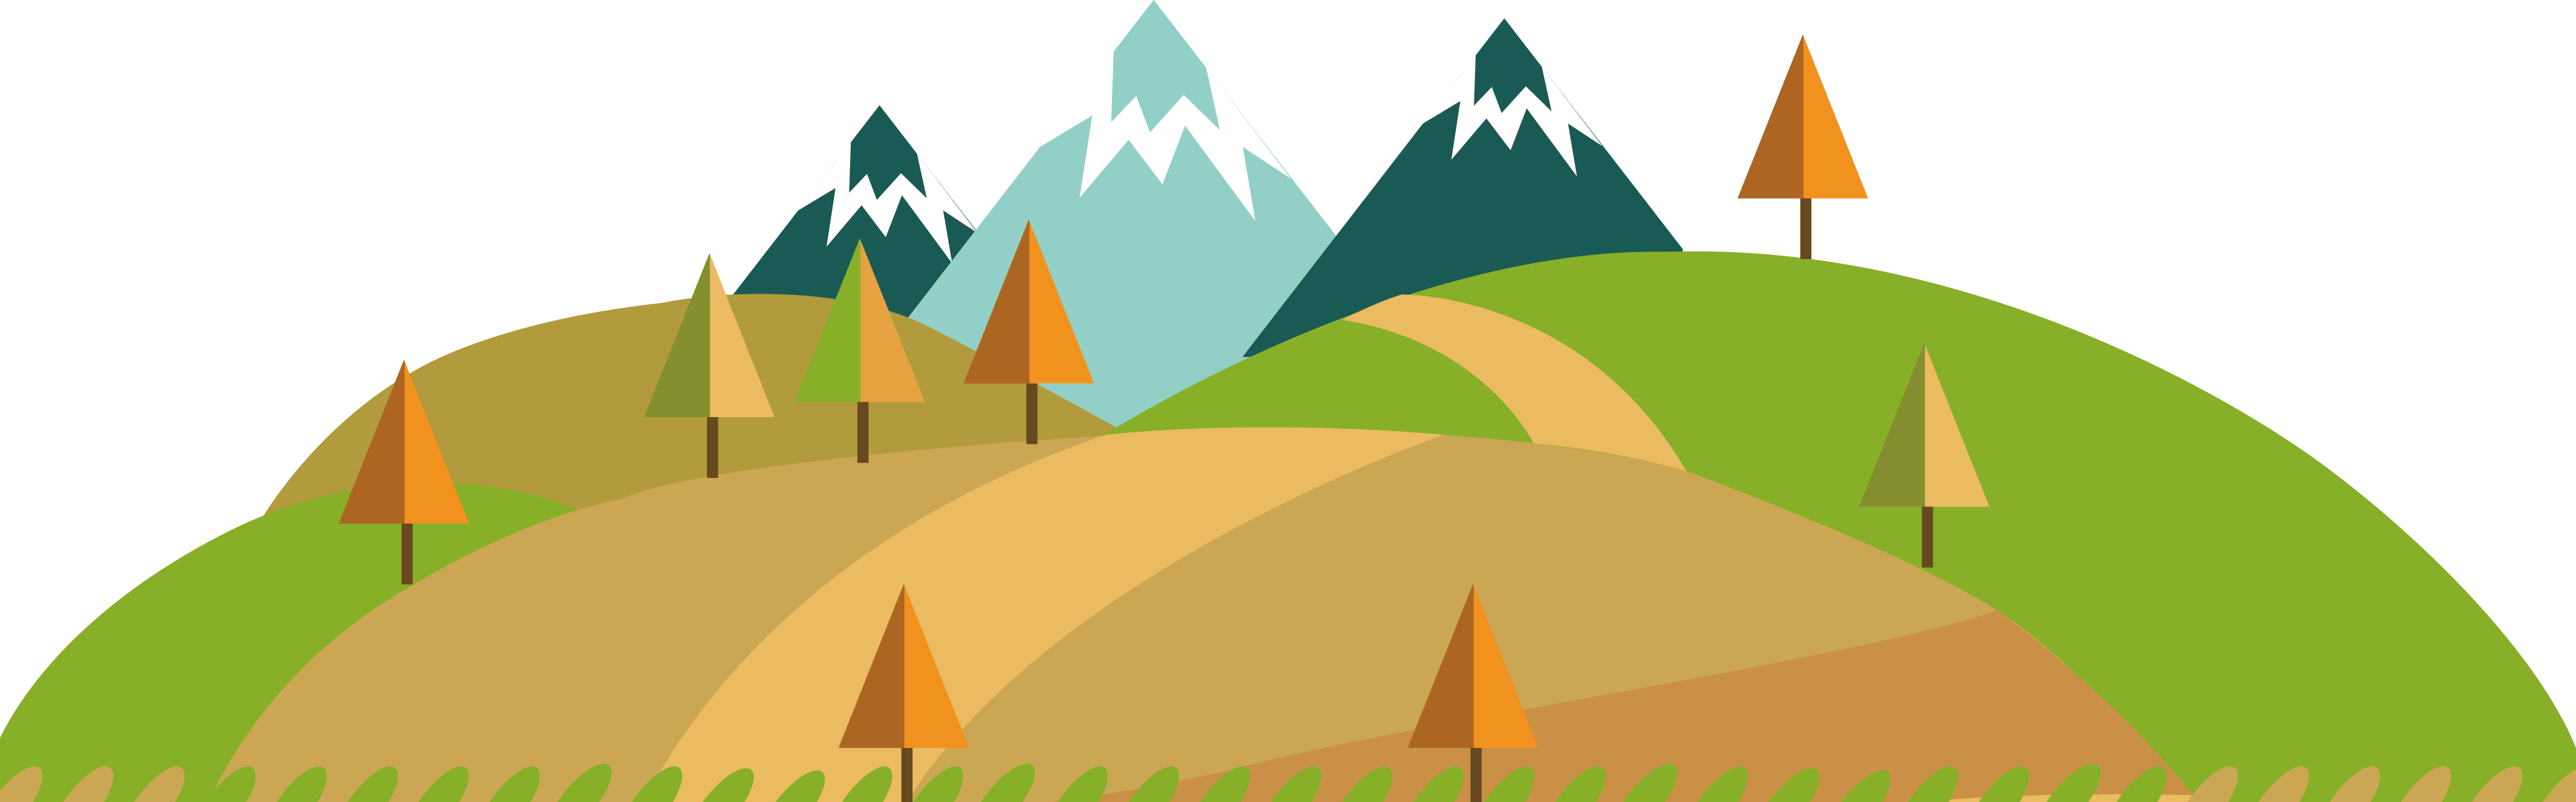 Download Clip art Flat mountain scenery png download